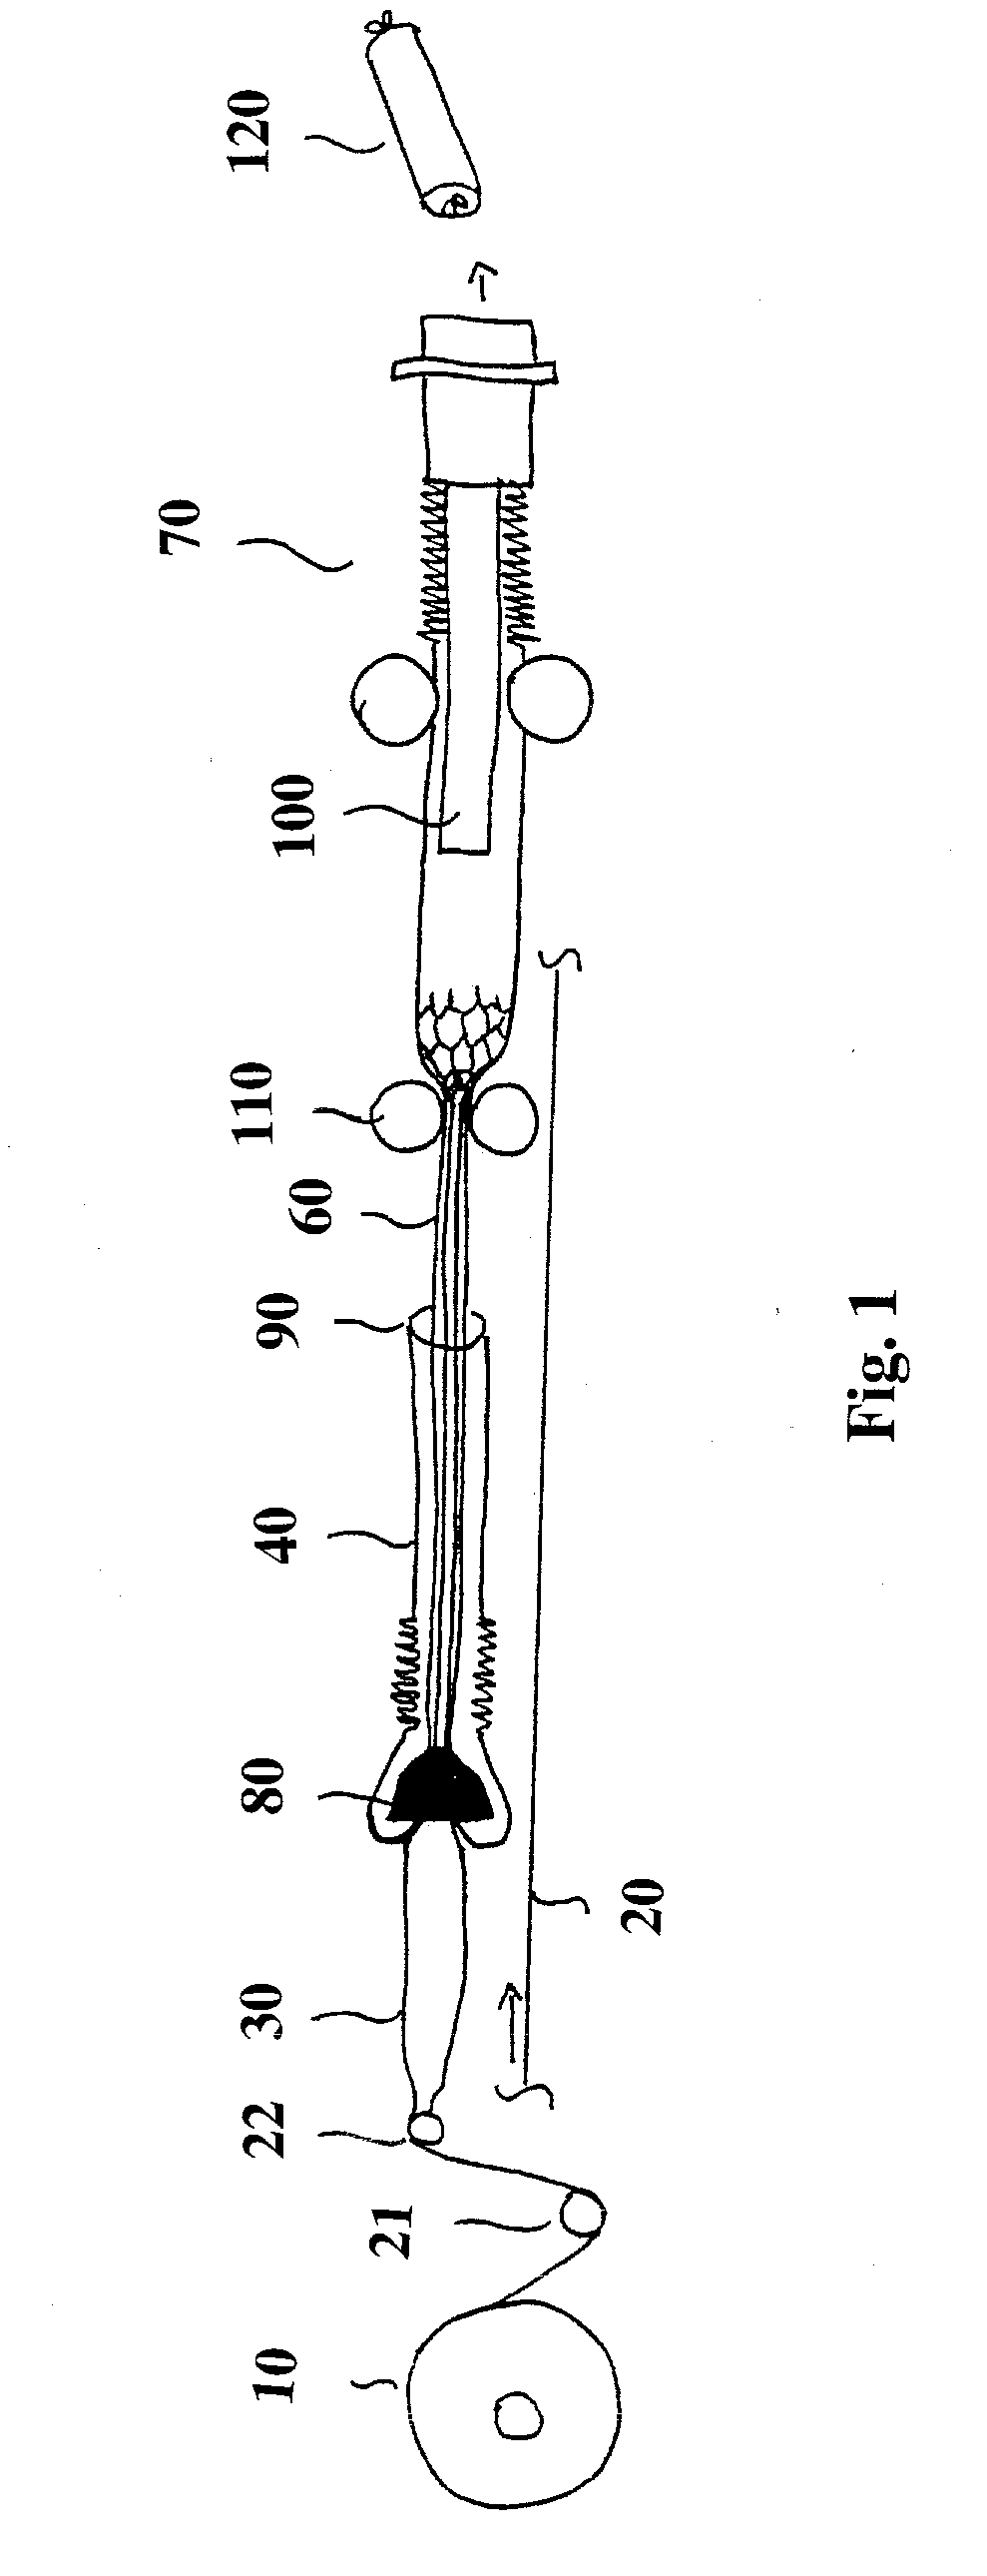 Method for Producing a Netted Casing